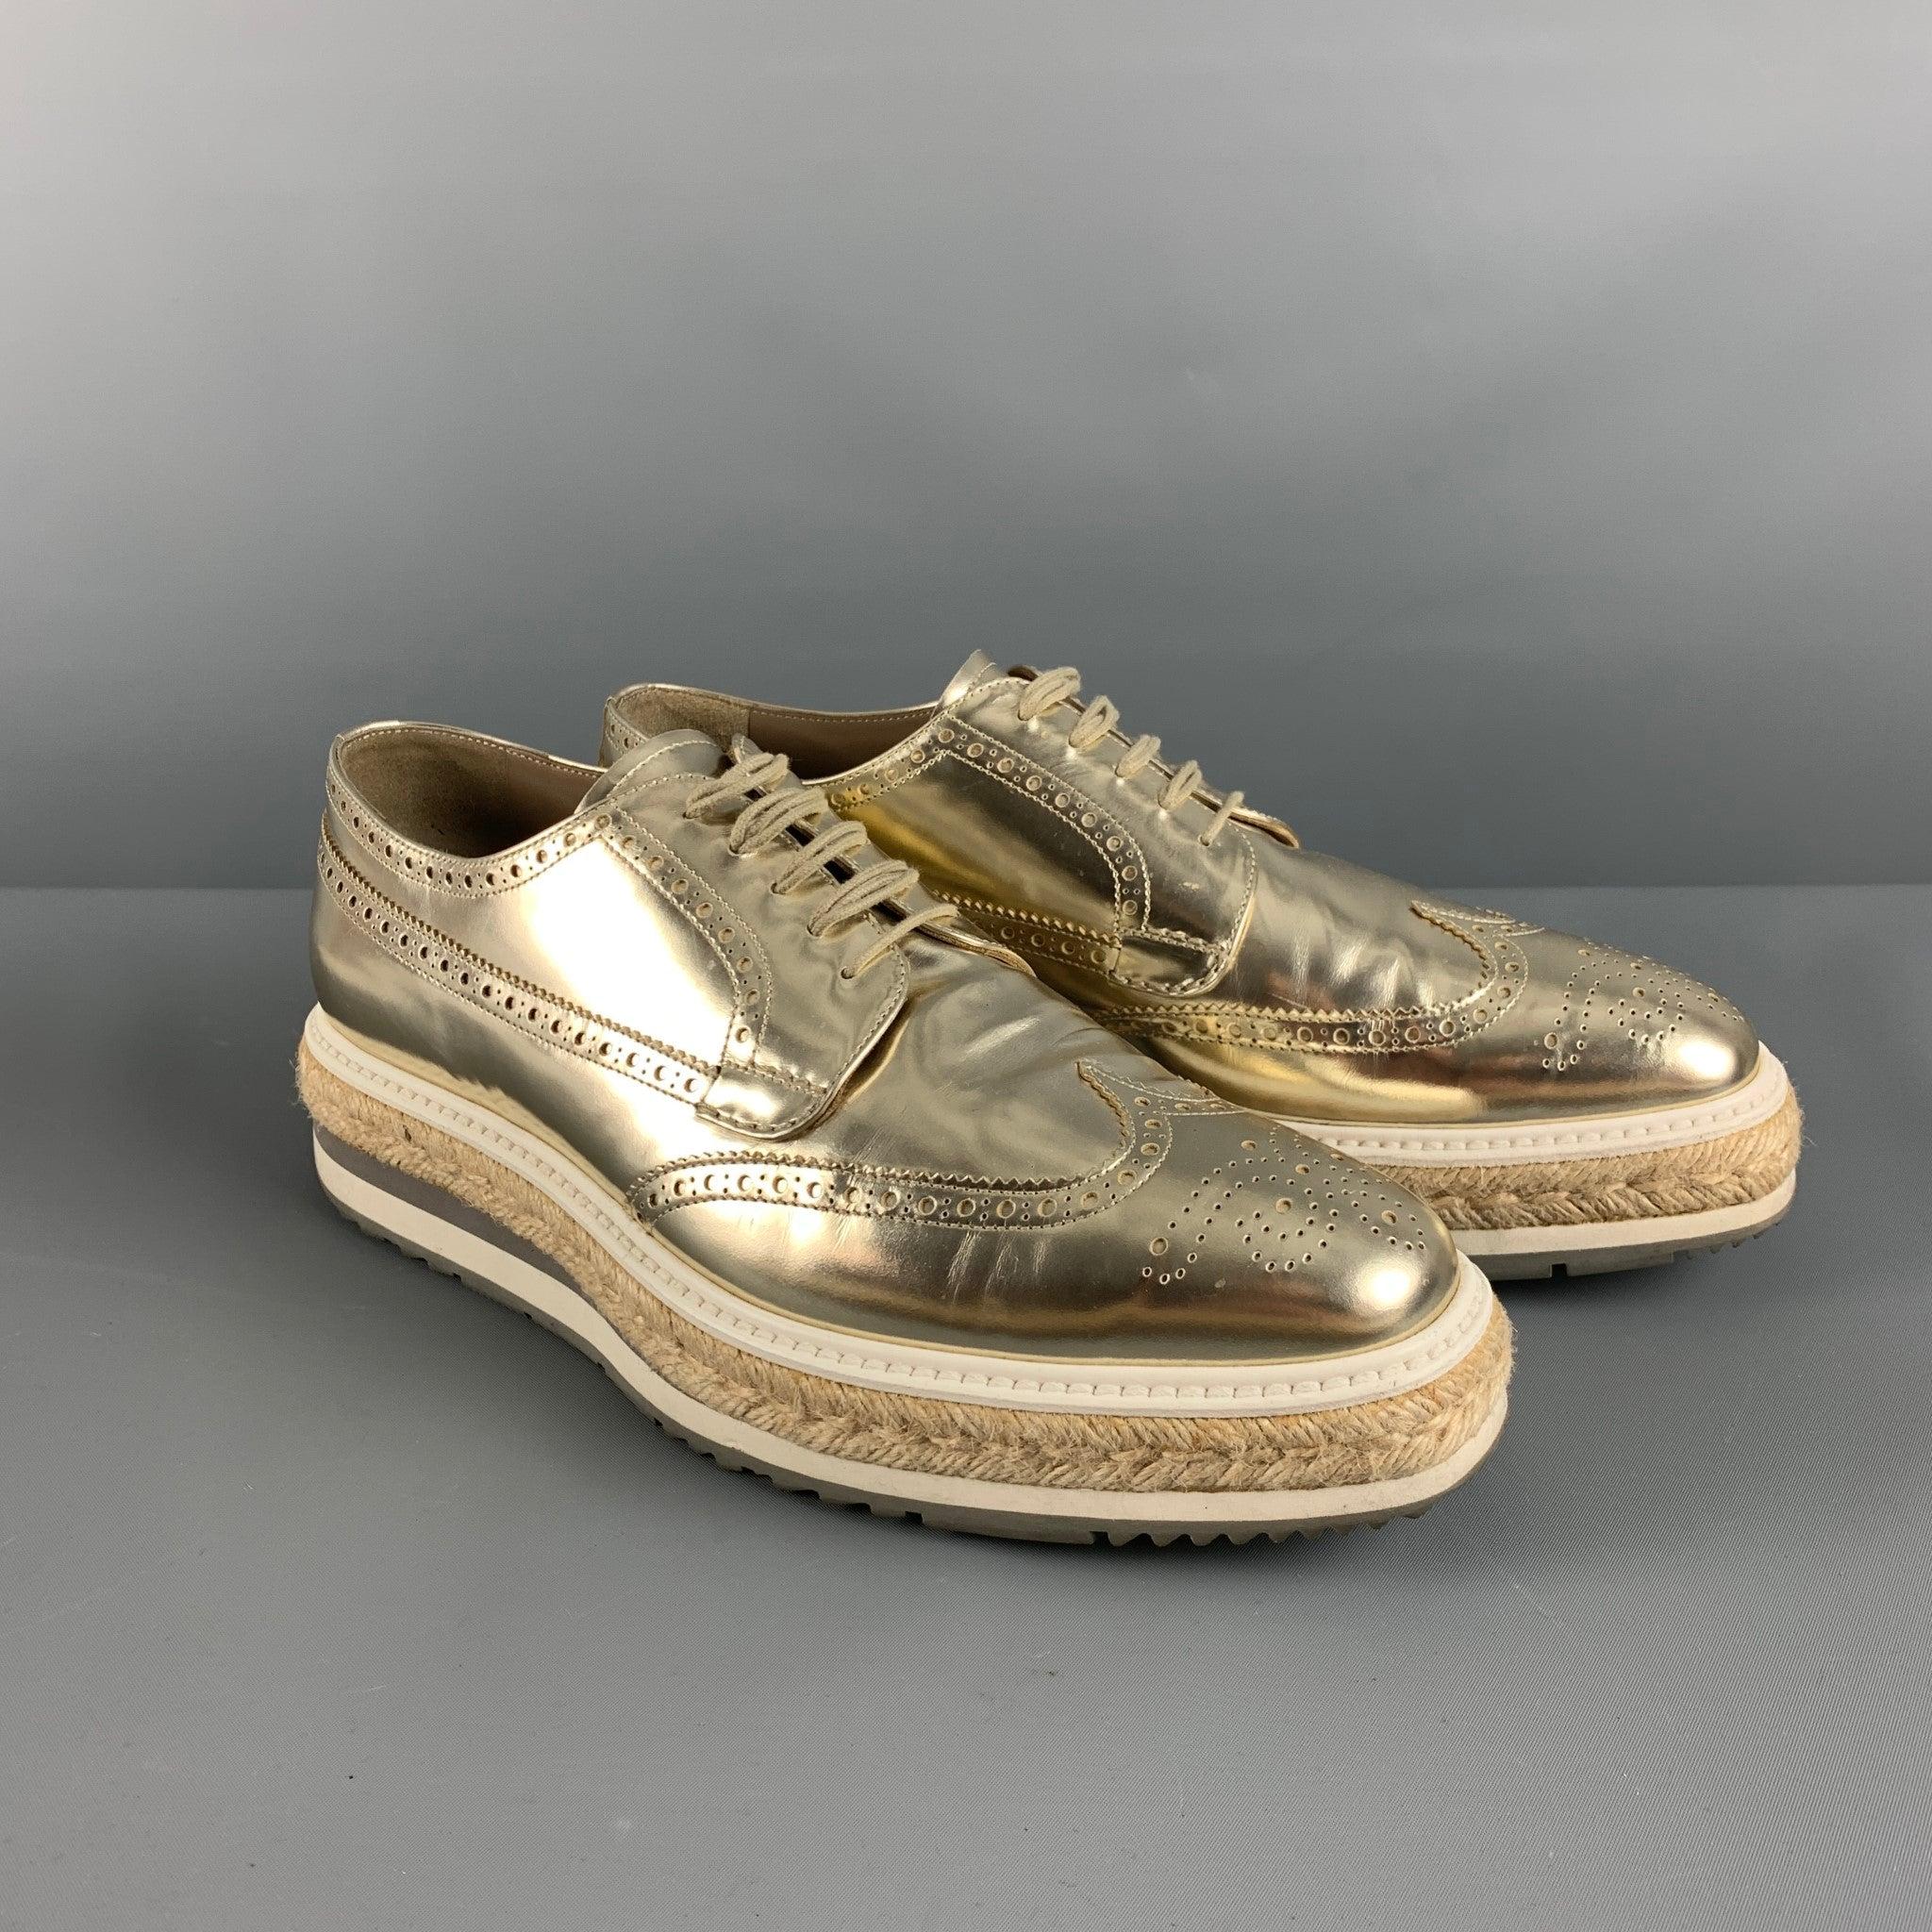 PRADA shoes comes in a gold metallic perforated leather featuring a wing tip style, jute trim rubber platform, square toe, and a lace up closure. Made in Italy. Includes dust bag.Very Good Pre-Owned Condition. 

Marked:   2EG0159. Size 10Outsole: 12